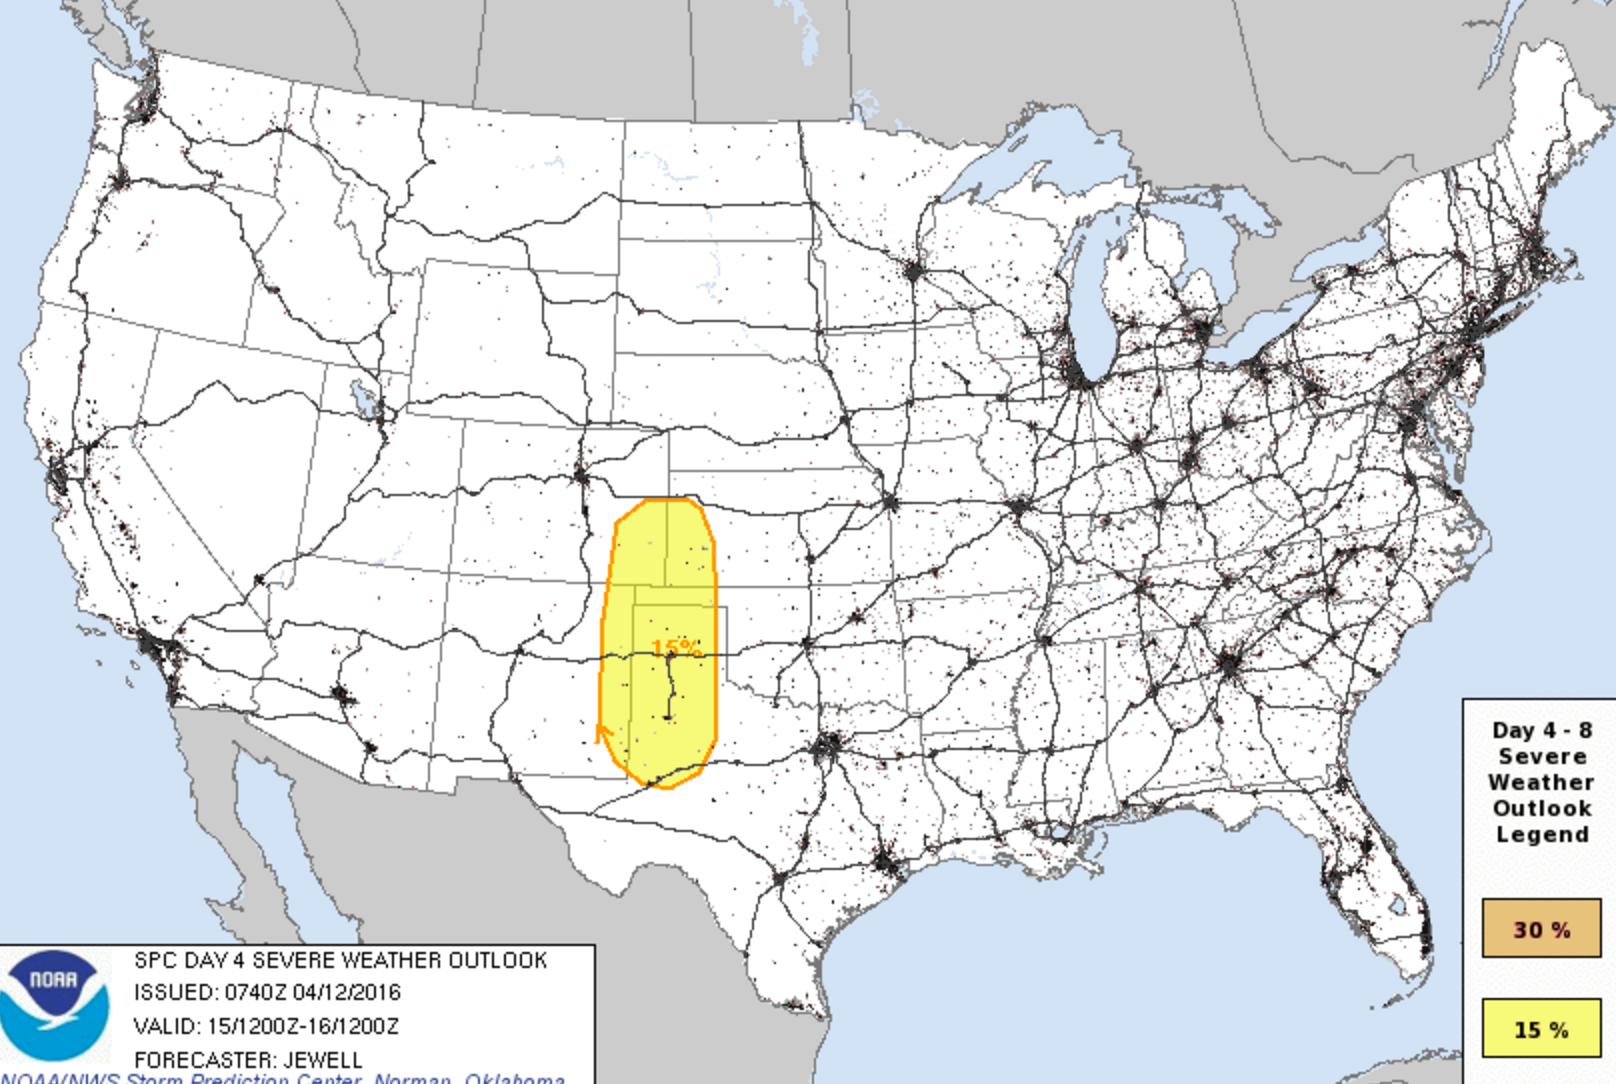 SPC day four (Friday) severe weather outloook